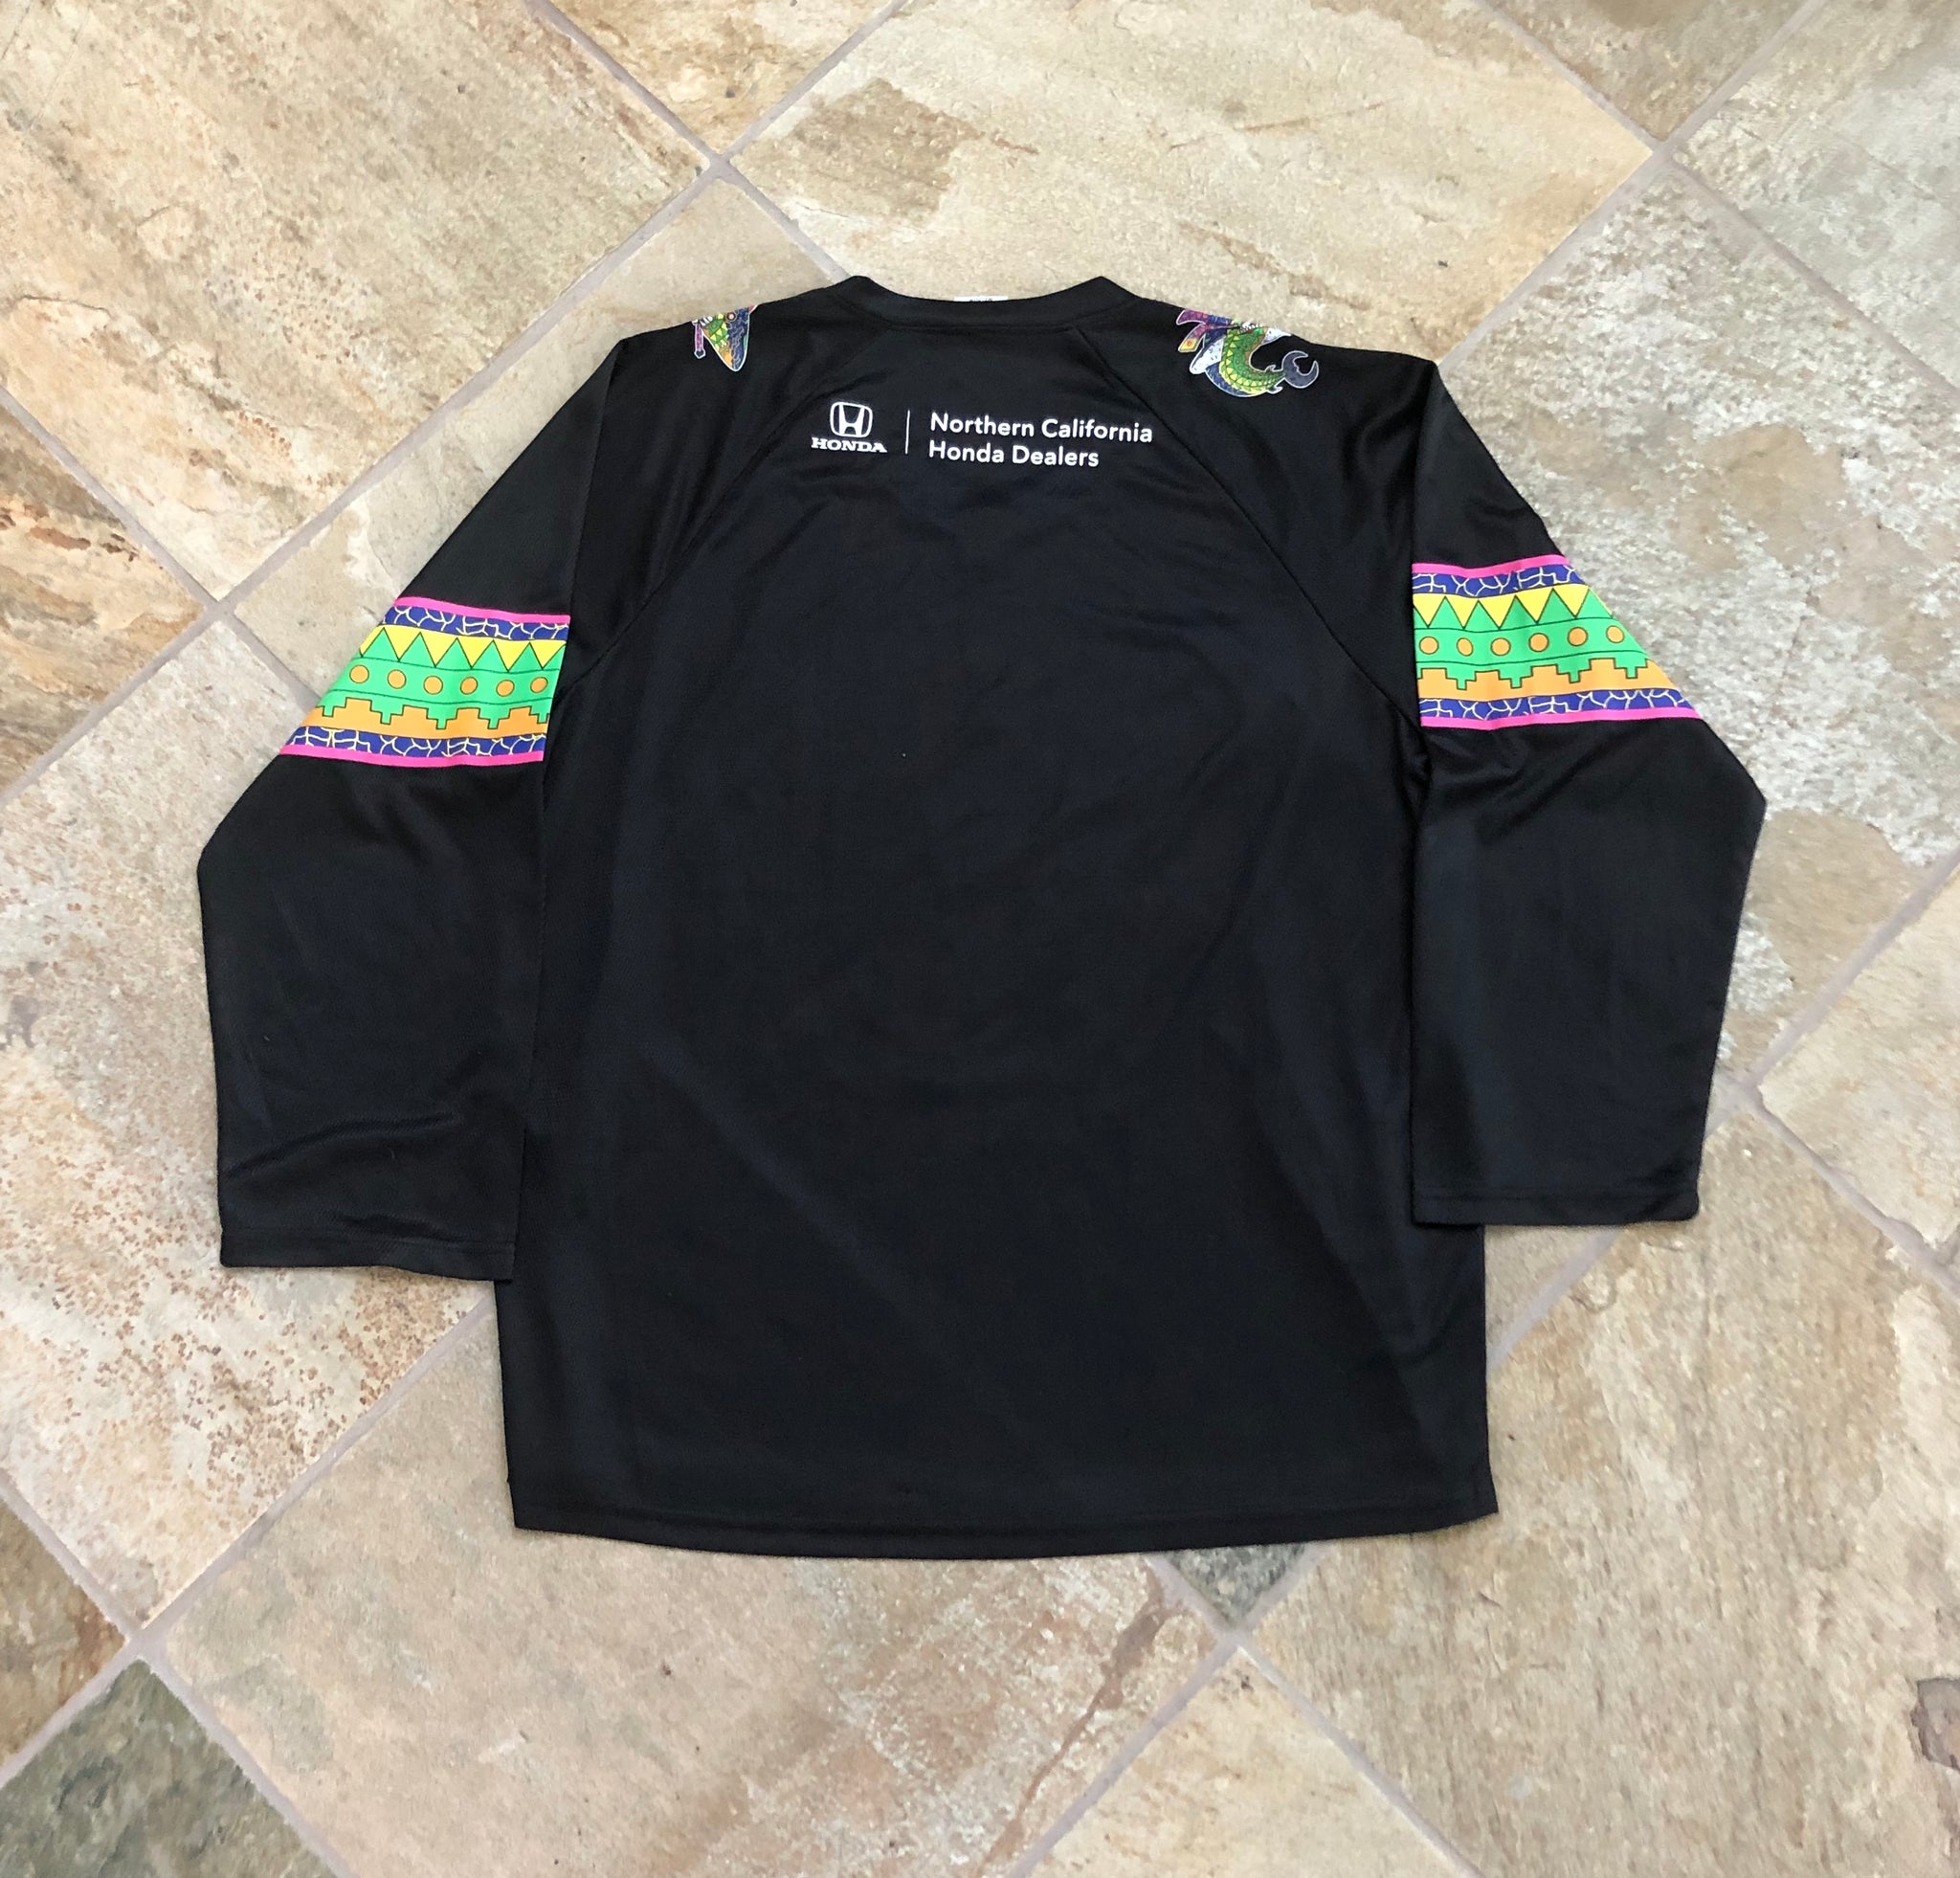 Los Tiburones Sharks Jersey Size XL for Sale in San Jose, CA